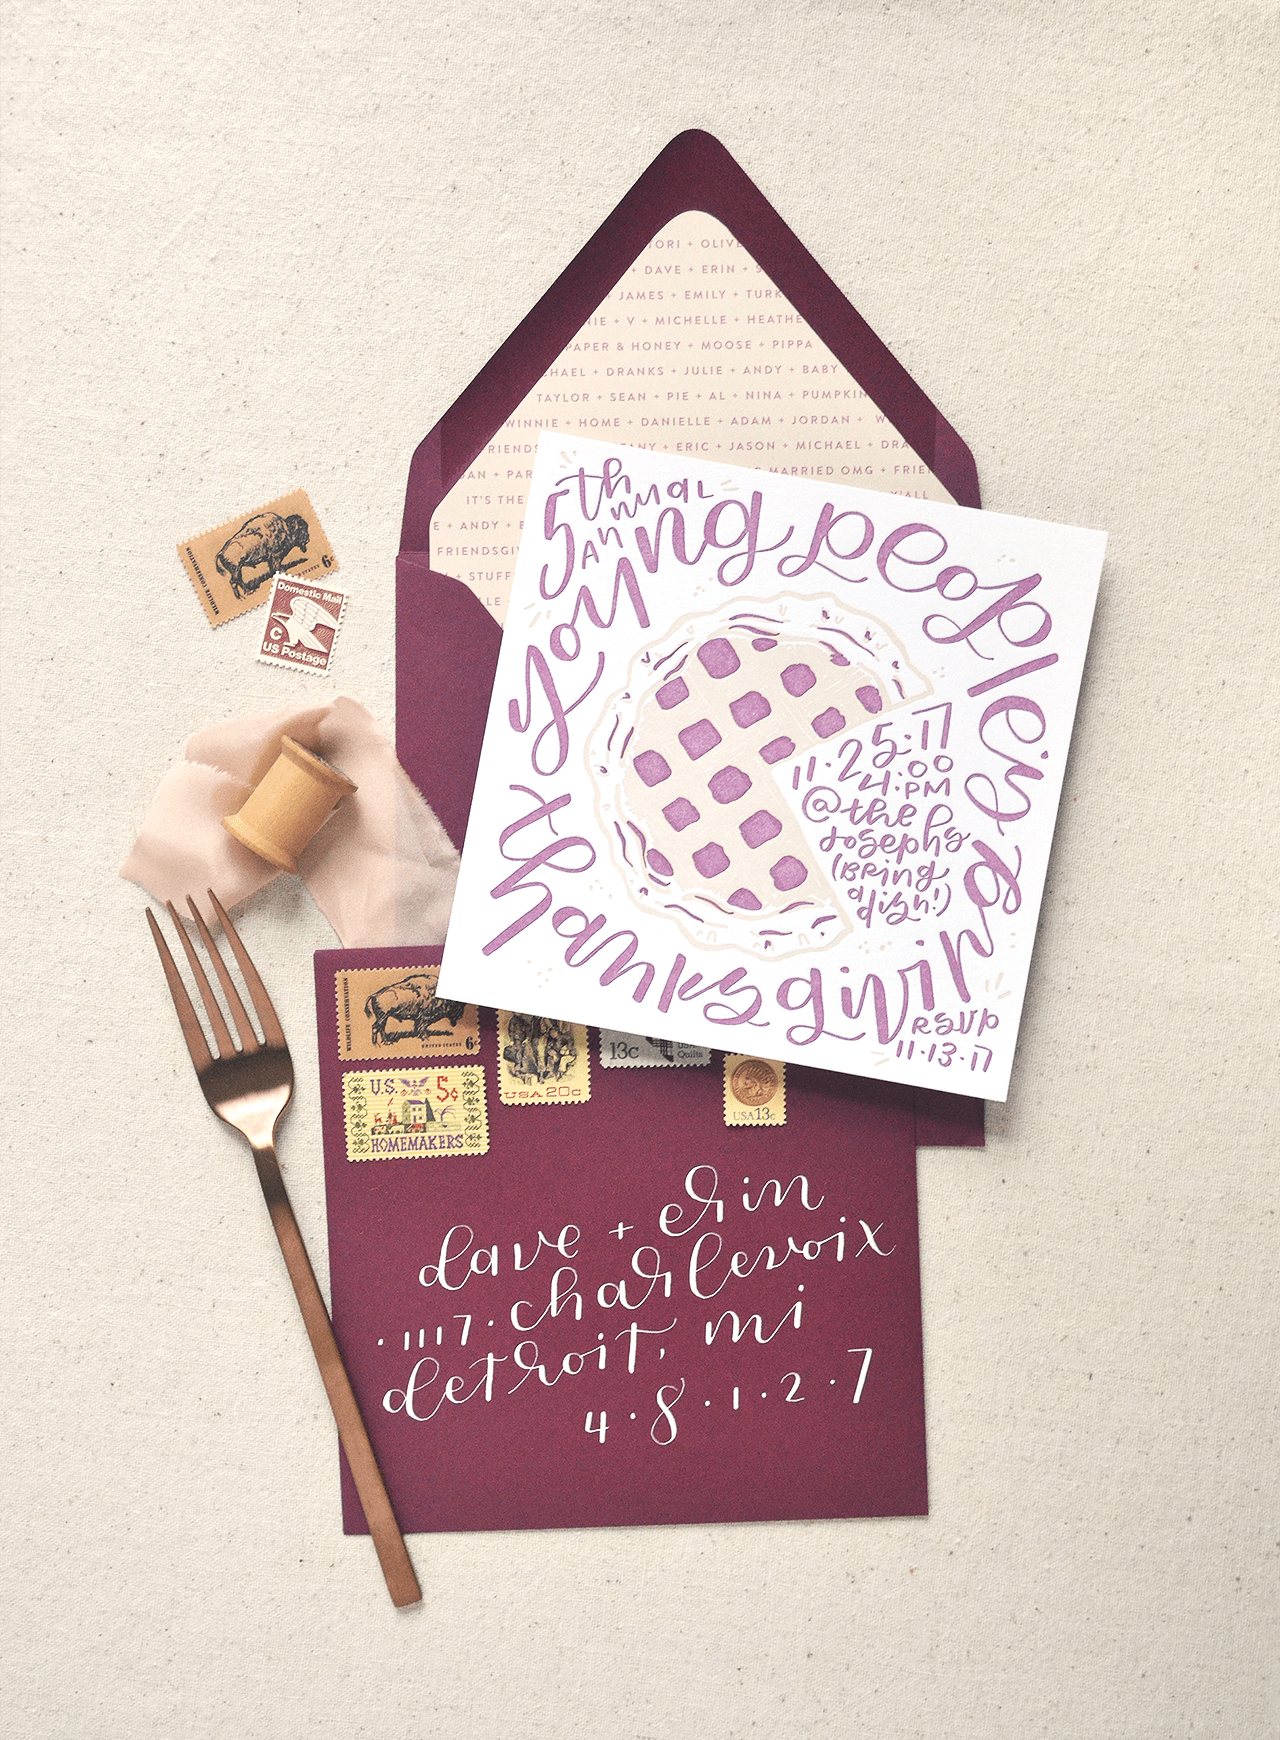 Letterpress Friendsgiving invitations with whimsical playful lettering and envelope calligraphy / Young People's Thanksgiving / by Paper & Honey® paperandhoney.com / heirloom wedding invitations made in Michigan, serving Detroit, Ann Arbor, Grand Rapids, and worldwide